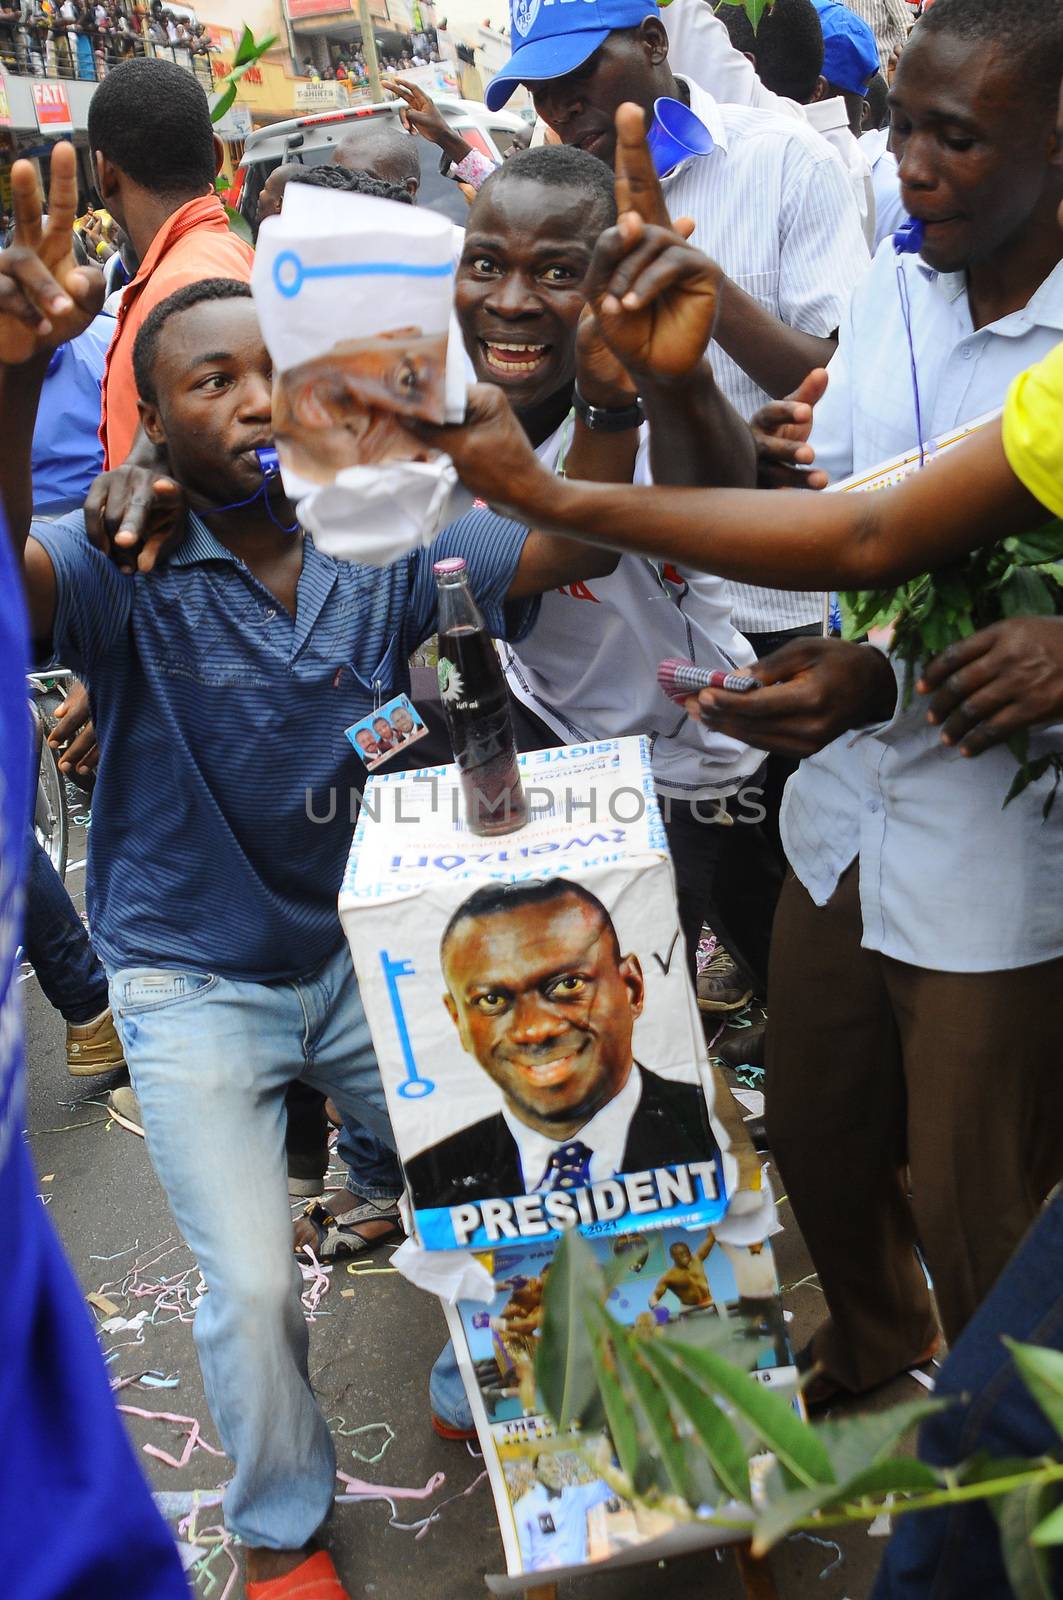 UGANDA, Kampala: Supporters cheer Forum for Democratic Change (FDC) presidential candidate Kizza Besigye at the Makerere University in Kampala on February 15, 2016. Violence erupted as the opposition candidate was arrested twice on his way to several rallies by the police.